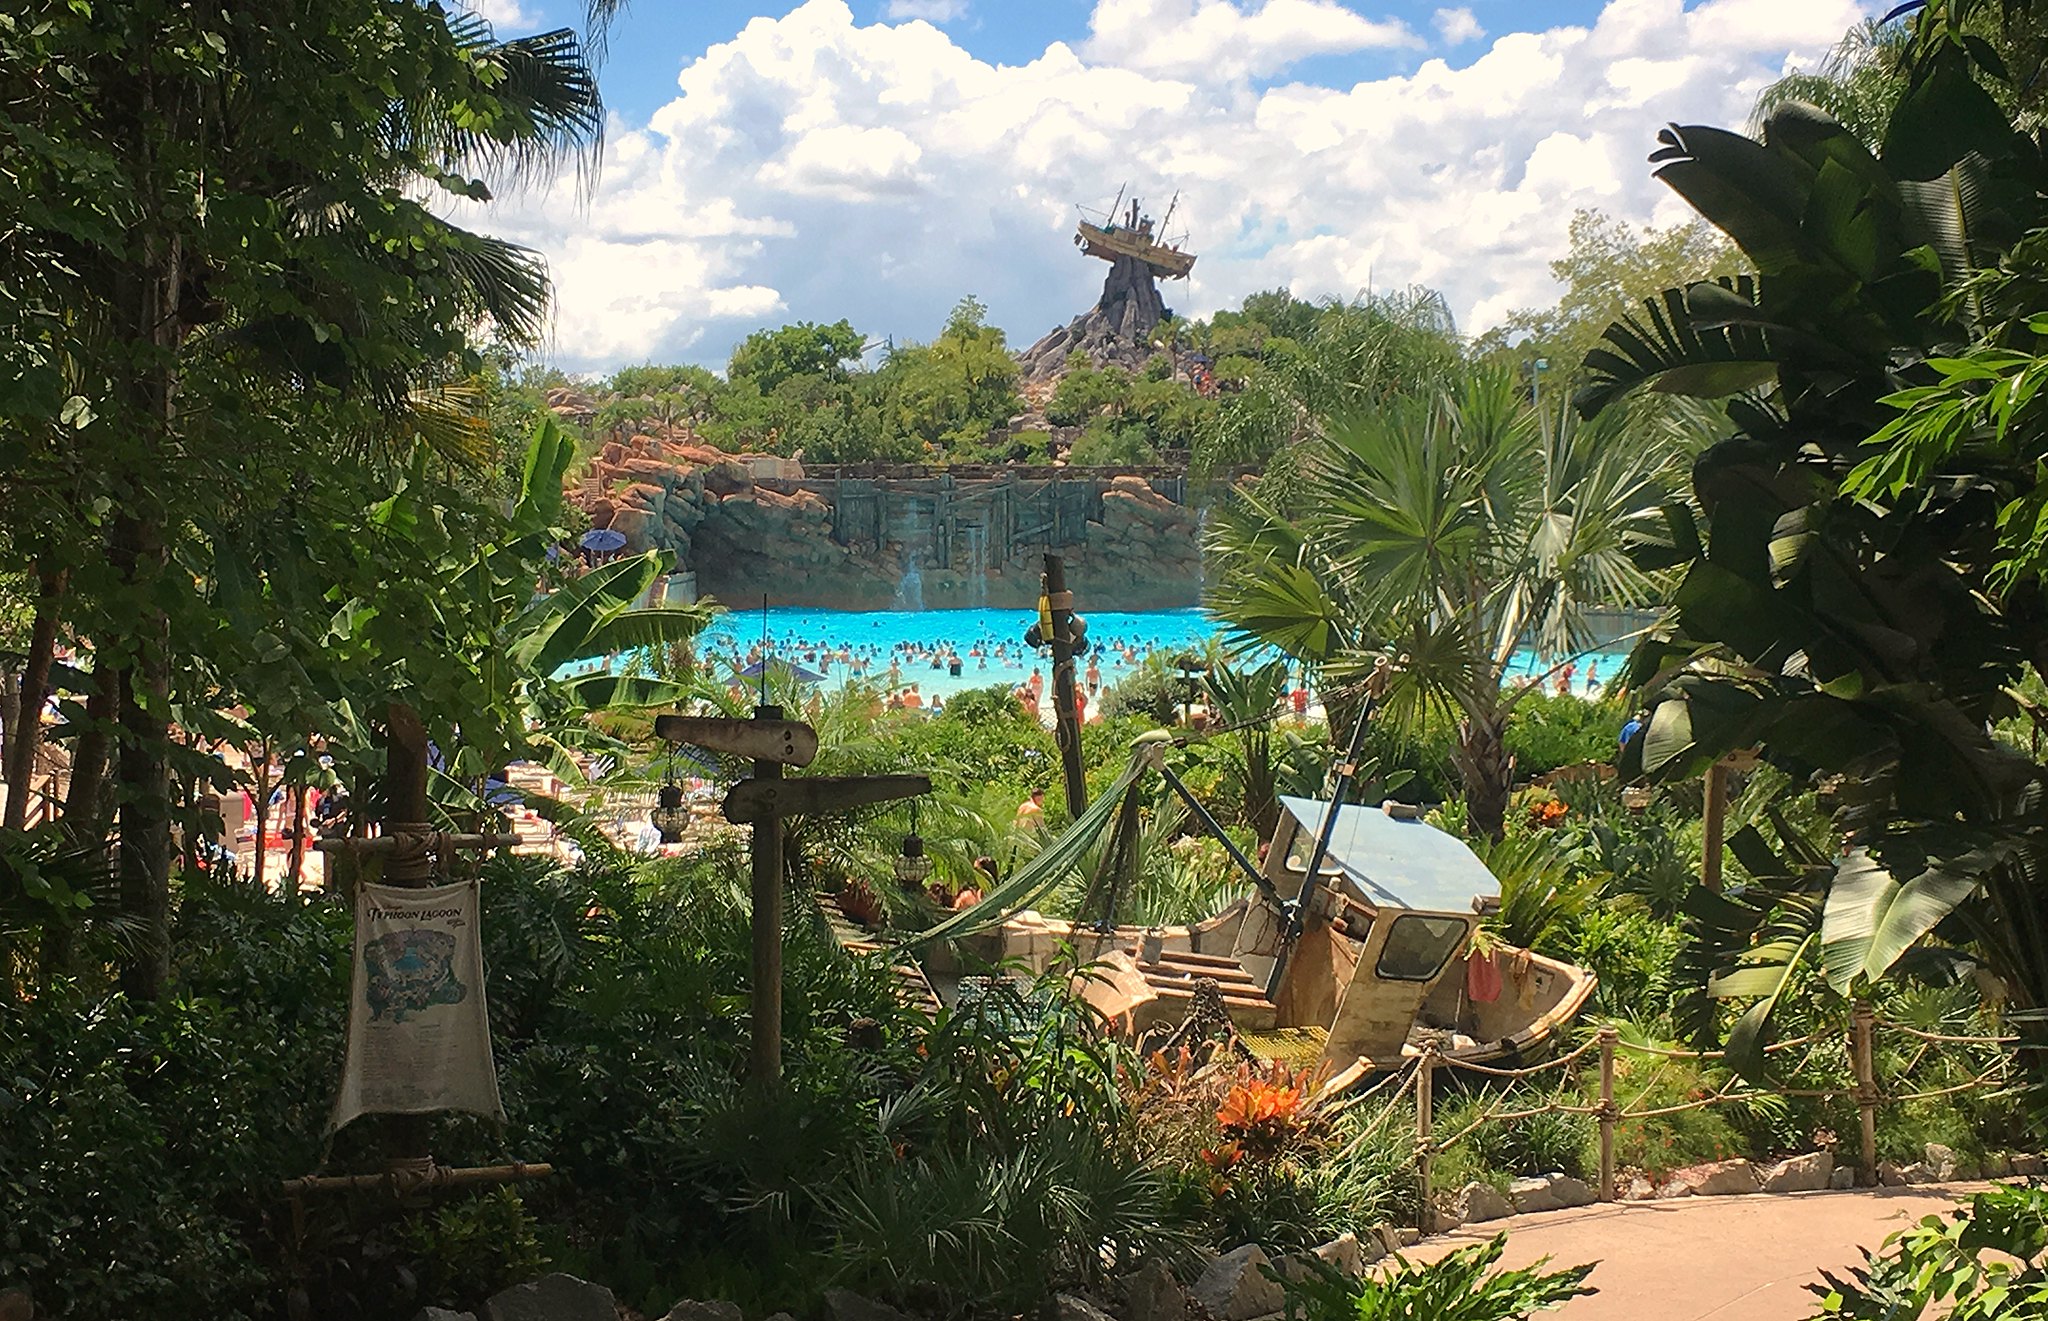 <p>Some of the most popular attractions at the park include the Magic Kingdom, Blizzard Beach and Typhoon Lagoon waterparks, and the Animal Kingdom Park, where you can see some of <strong>the world’s most exotic creatures.</strong> </p>  <p>There are also lots of places to eat and shop, as well as shows for visitors of all ages.</p>